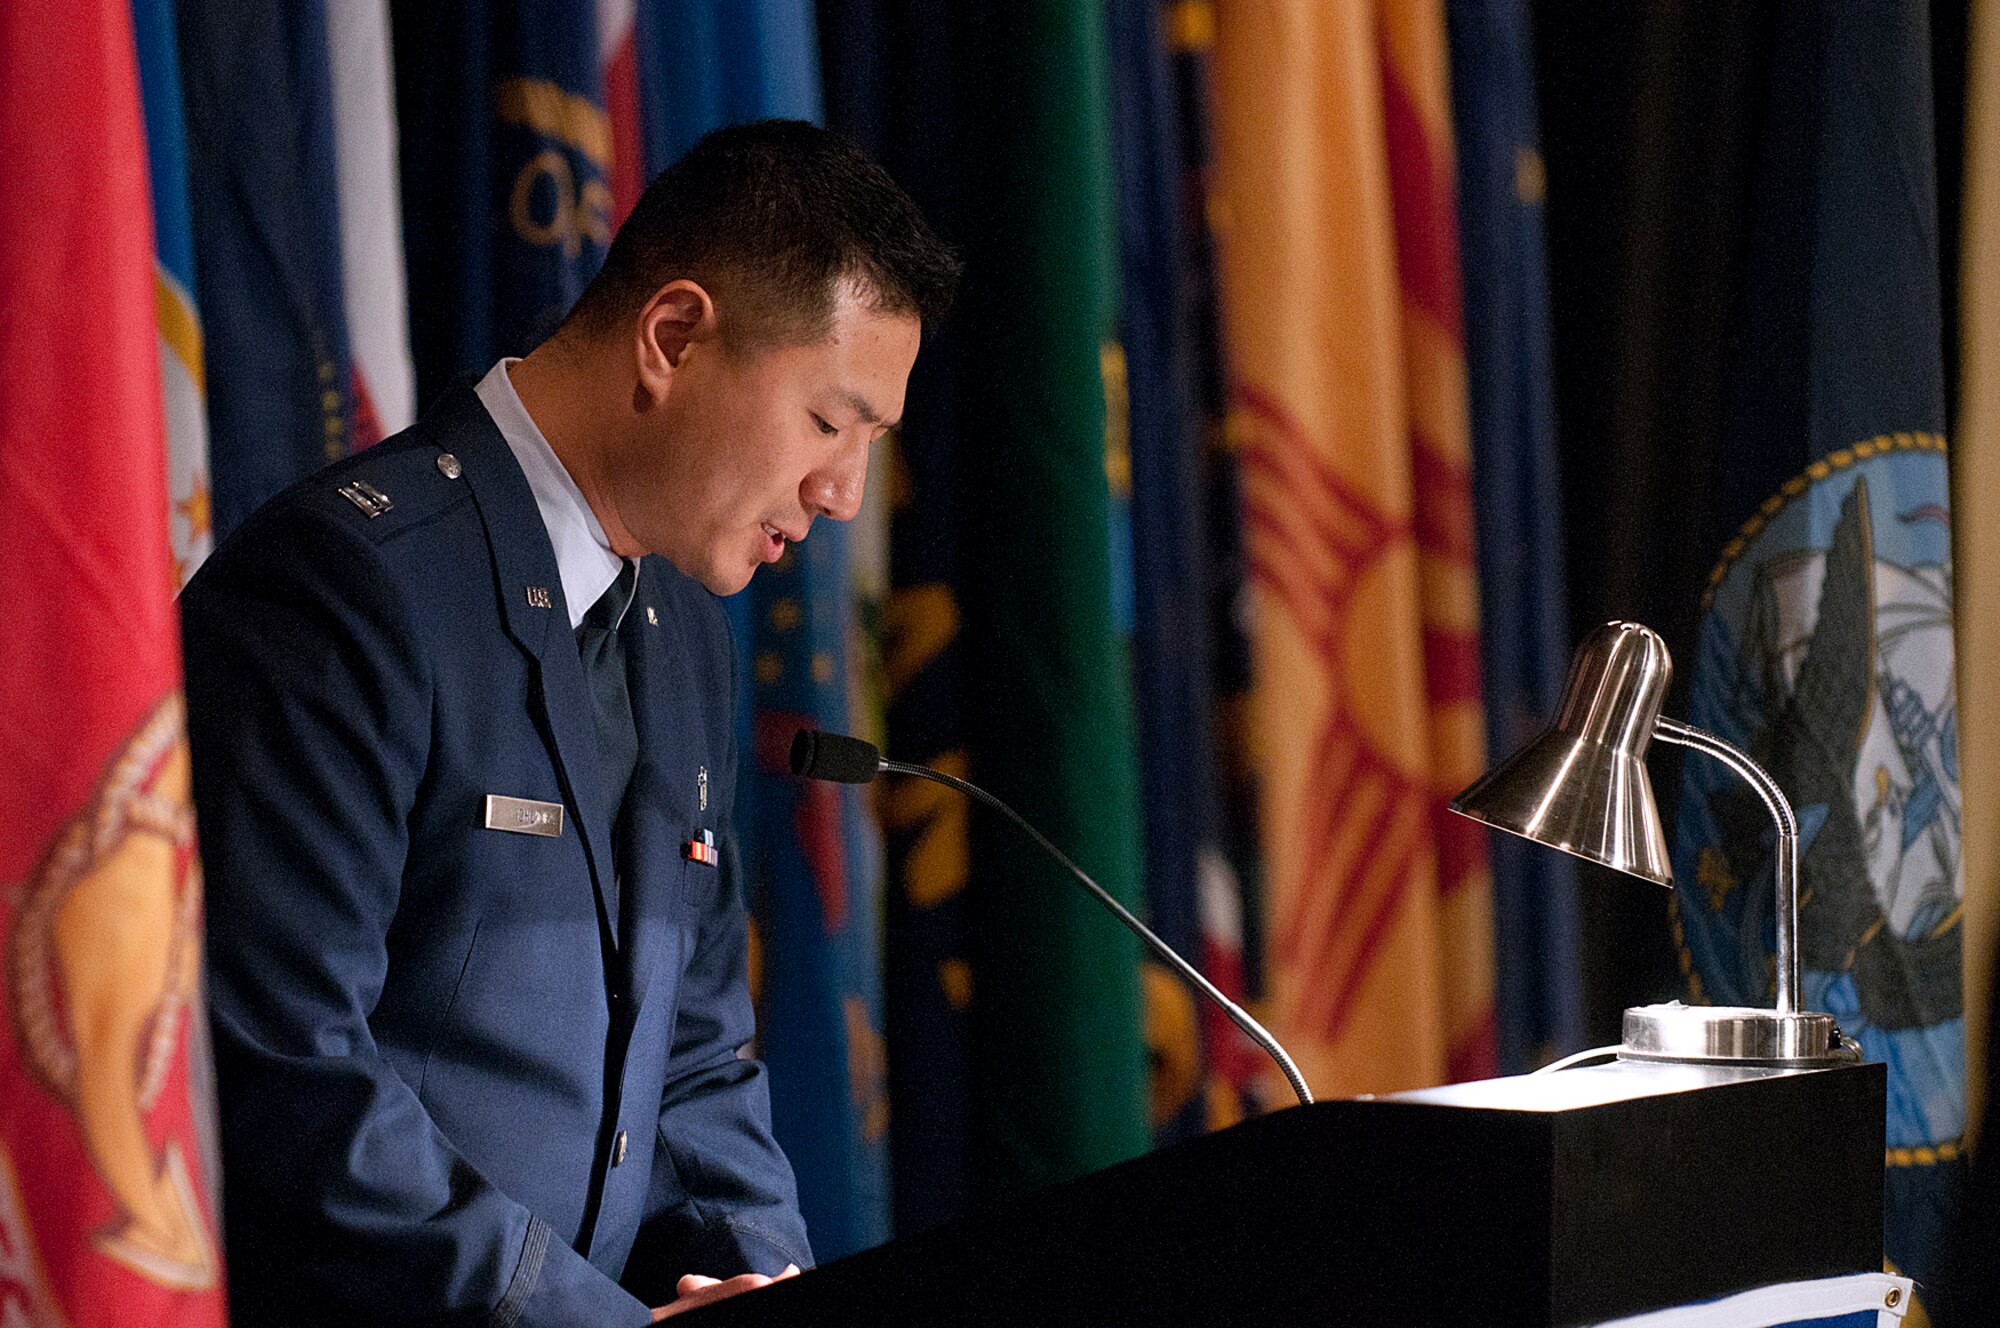 Chaplain (Capt.) Myung Cho, 90th Missile Wing, gives the invocation at the Air Force Association’s Armed Forces Day Banquet in the Cheyenne Holiday Inn May 18. (U.S. Air Force photo by R.J. Oriez)